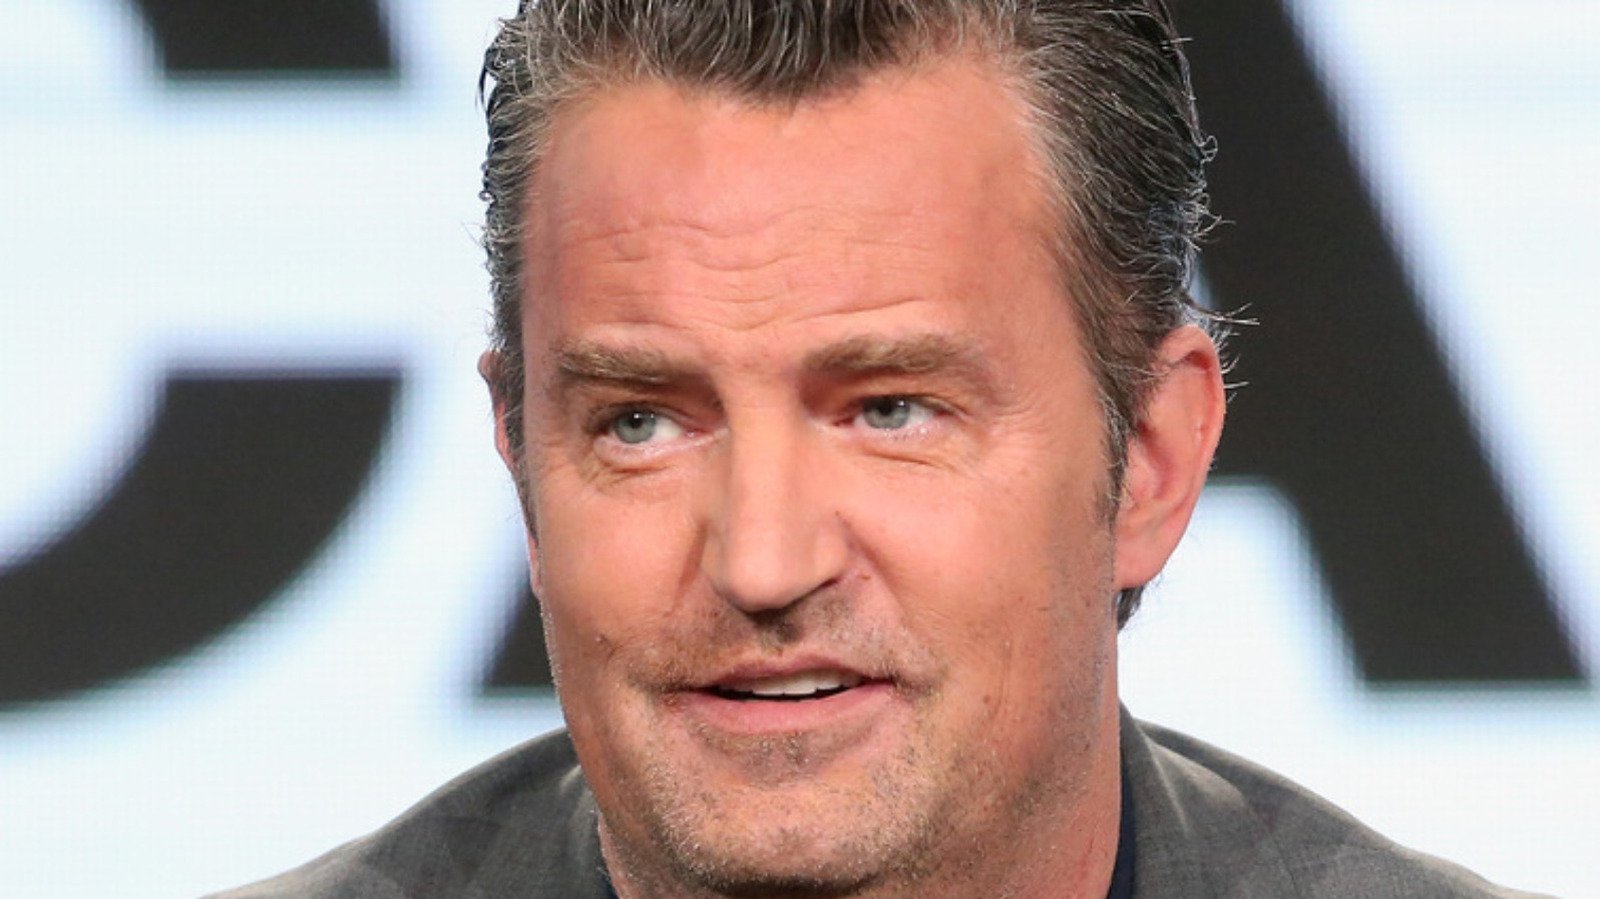 Is This The Reason Matthew Perry's Speech Was Slurred At The Friends Reunion?